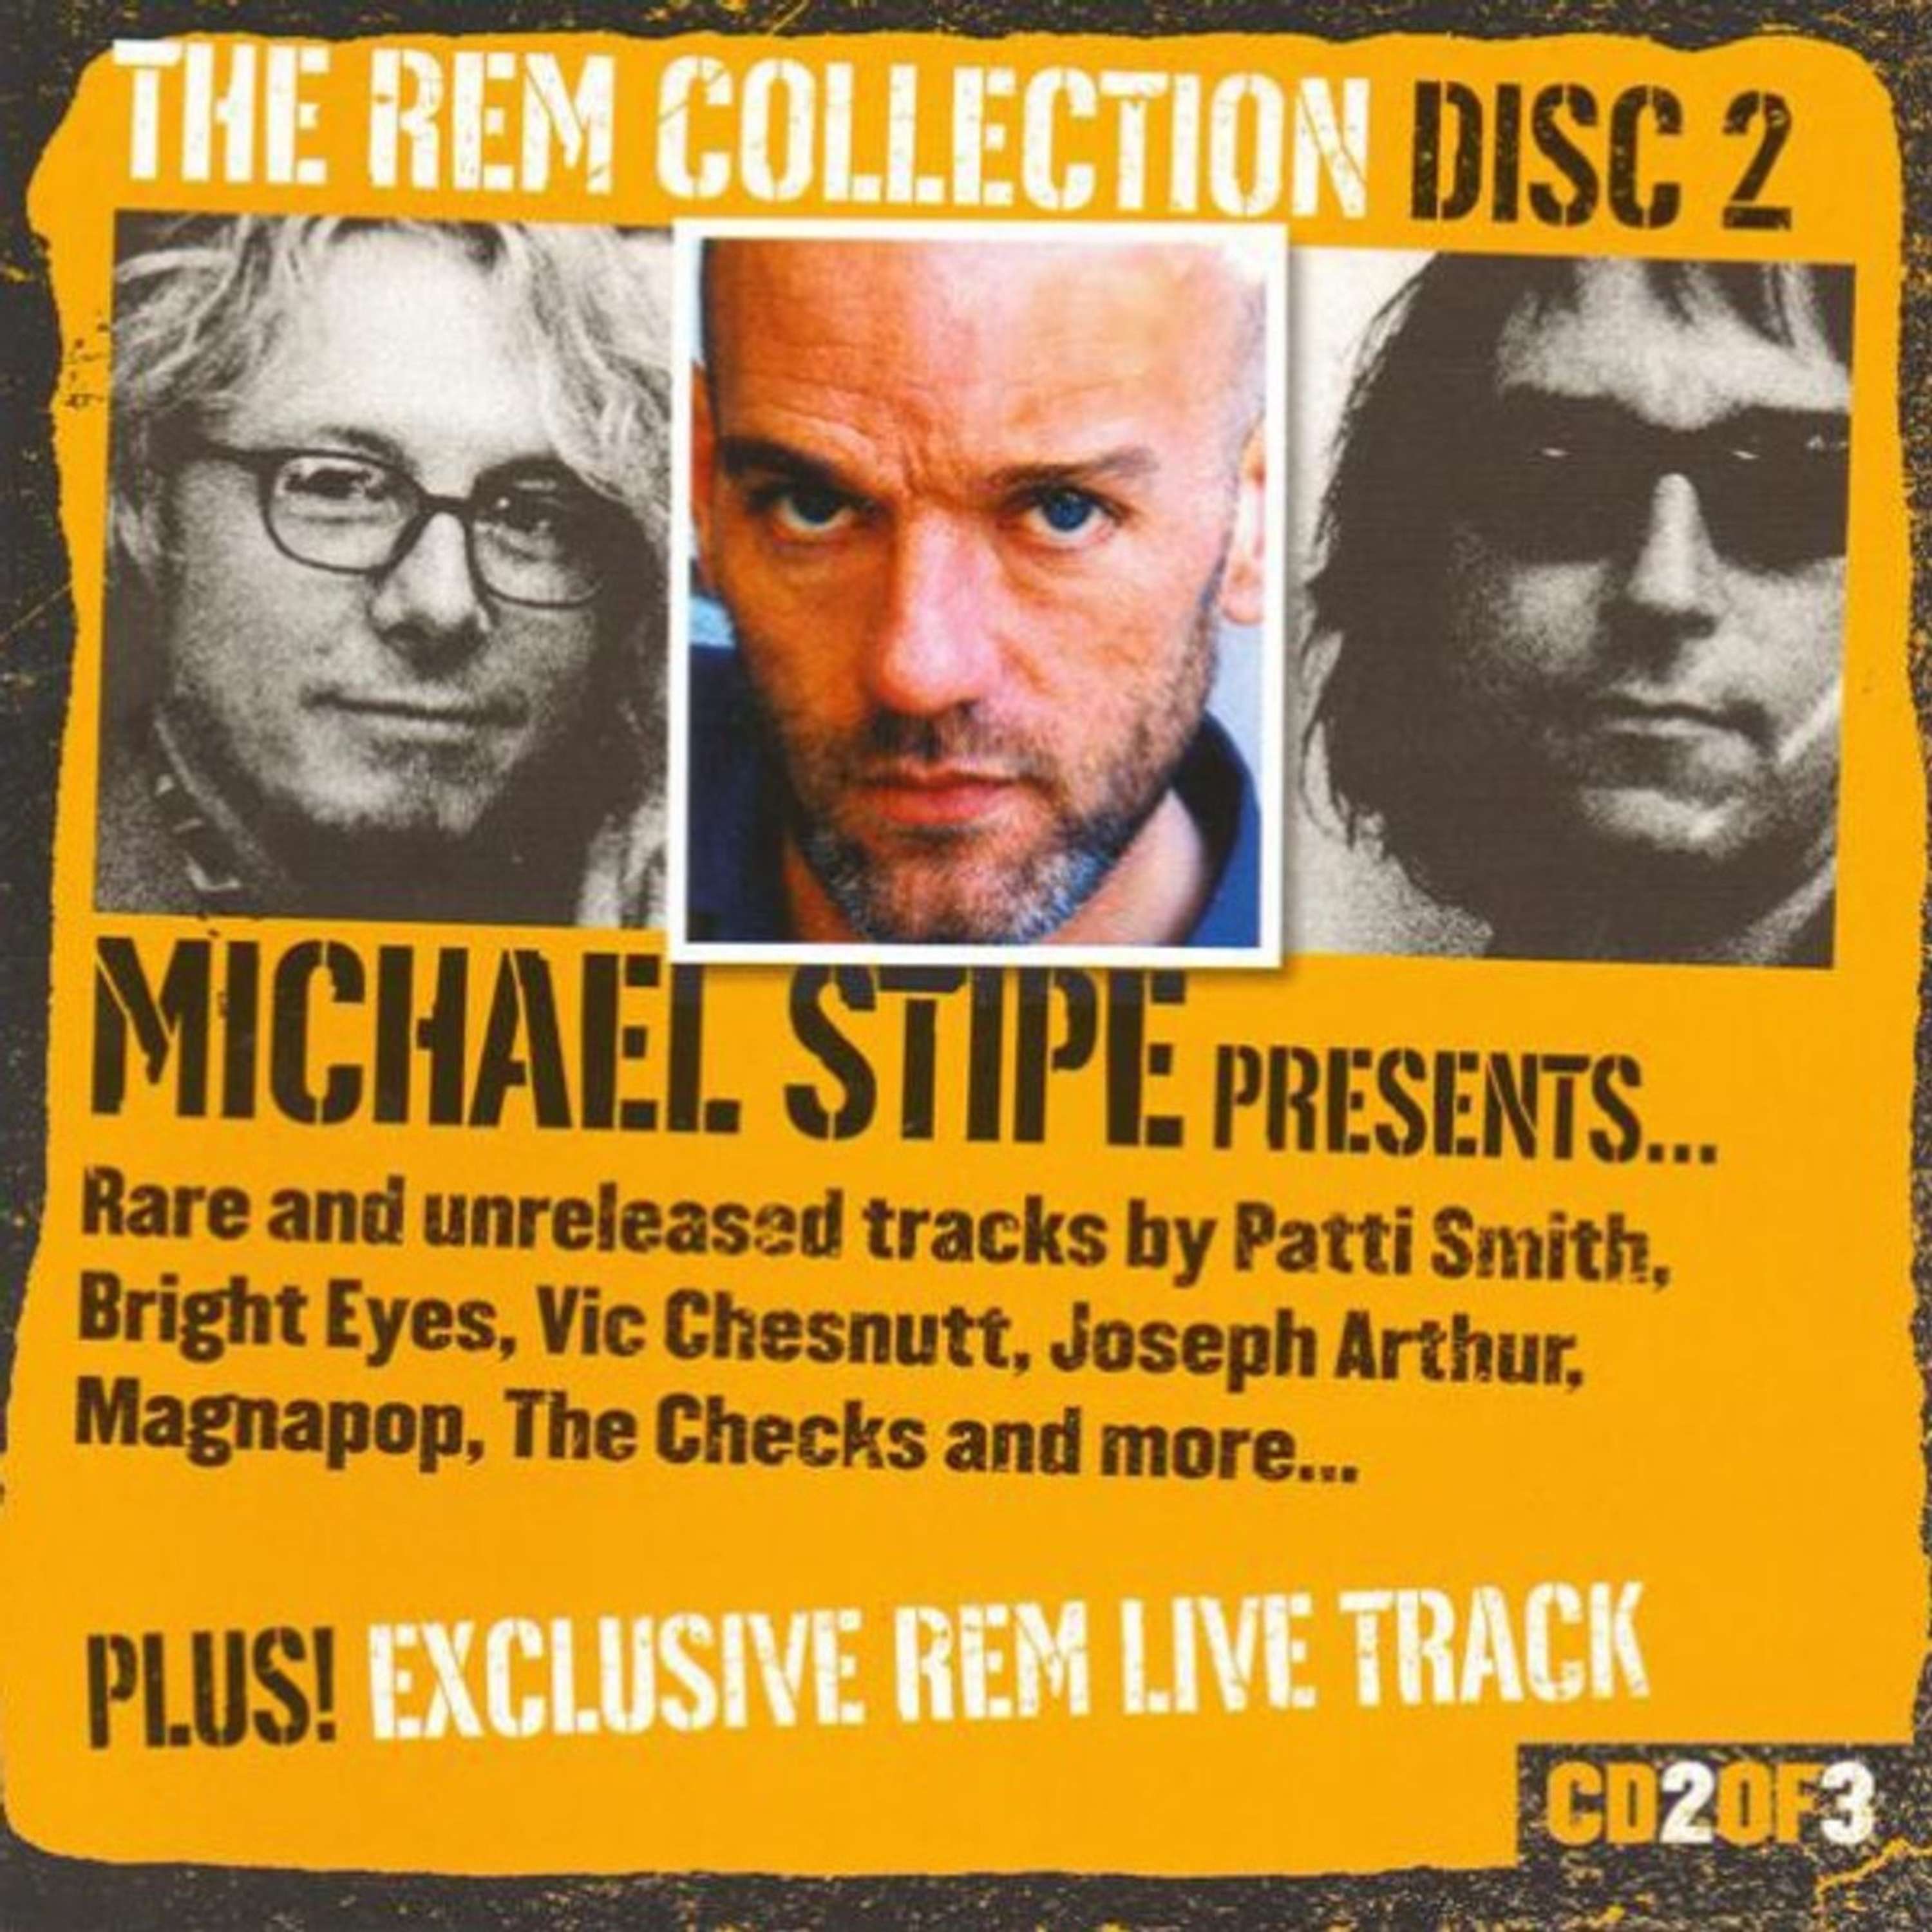 Free With This Months Issue 6 - Leah Fitzsimmons selects Uncut: The REM Collection Disc 2 Michael Stipe Presents Rare And Unreleased Tracks